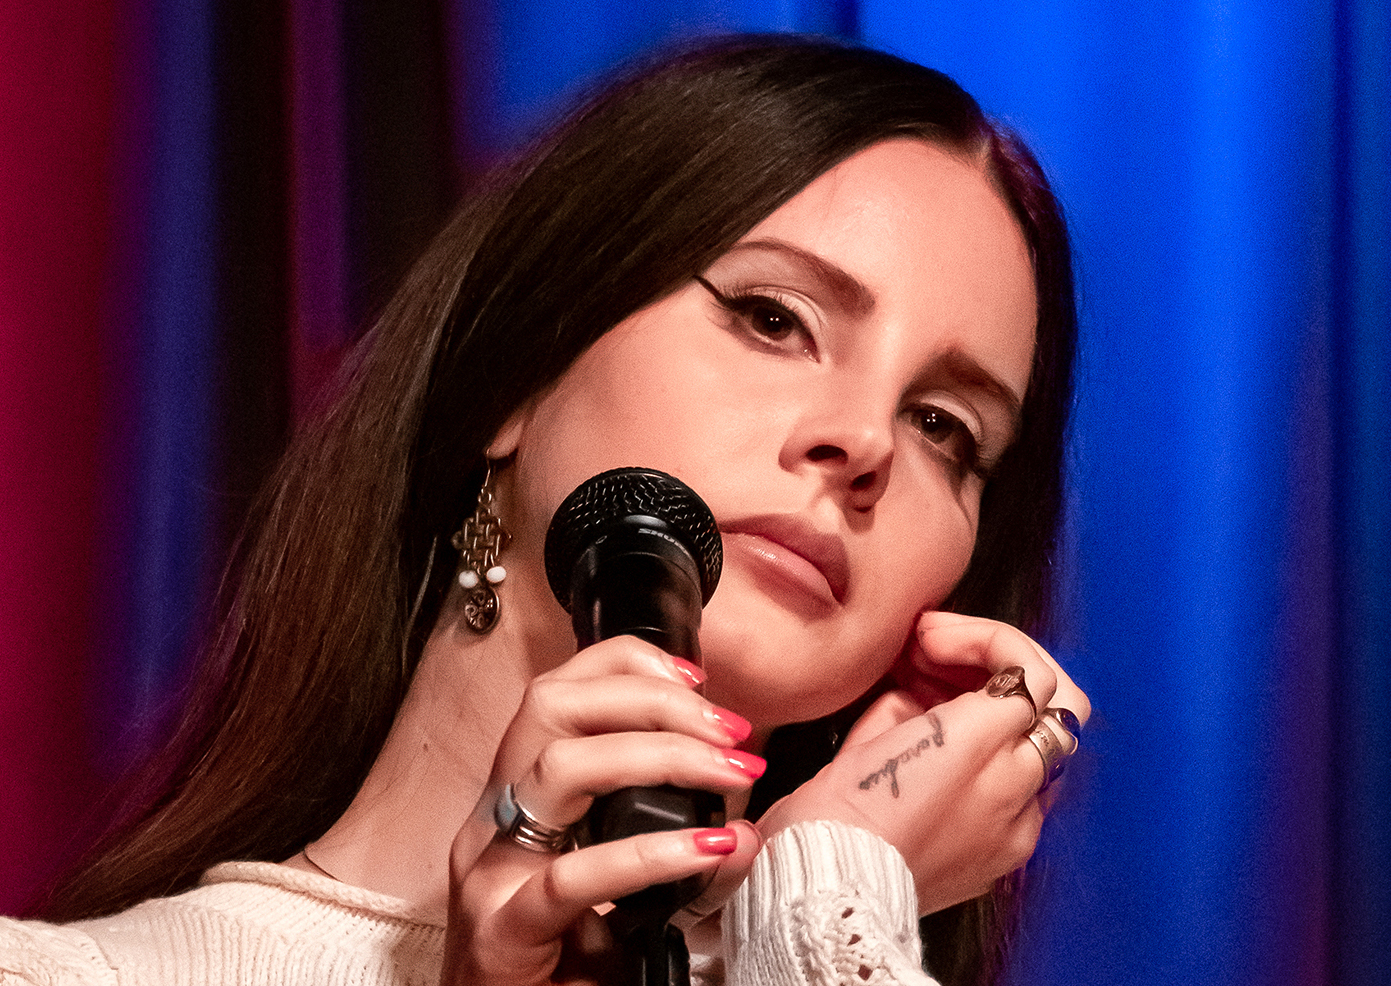 List of awards and nominations received by Lana Del Rey - Wikipedia